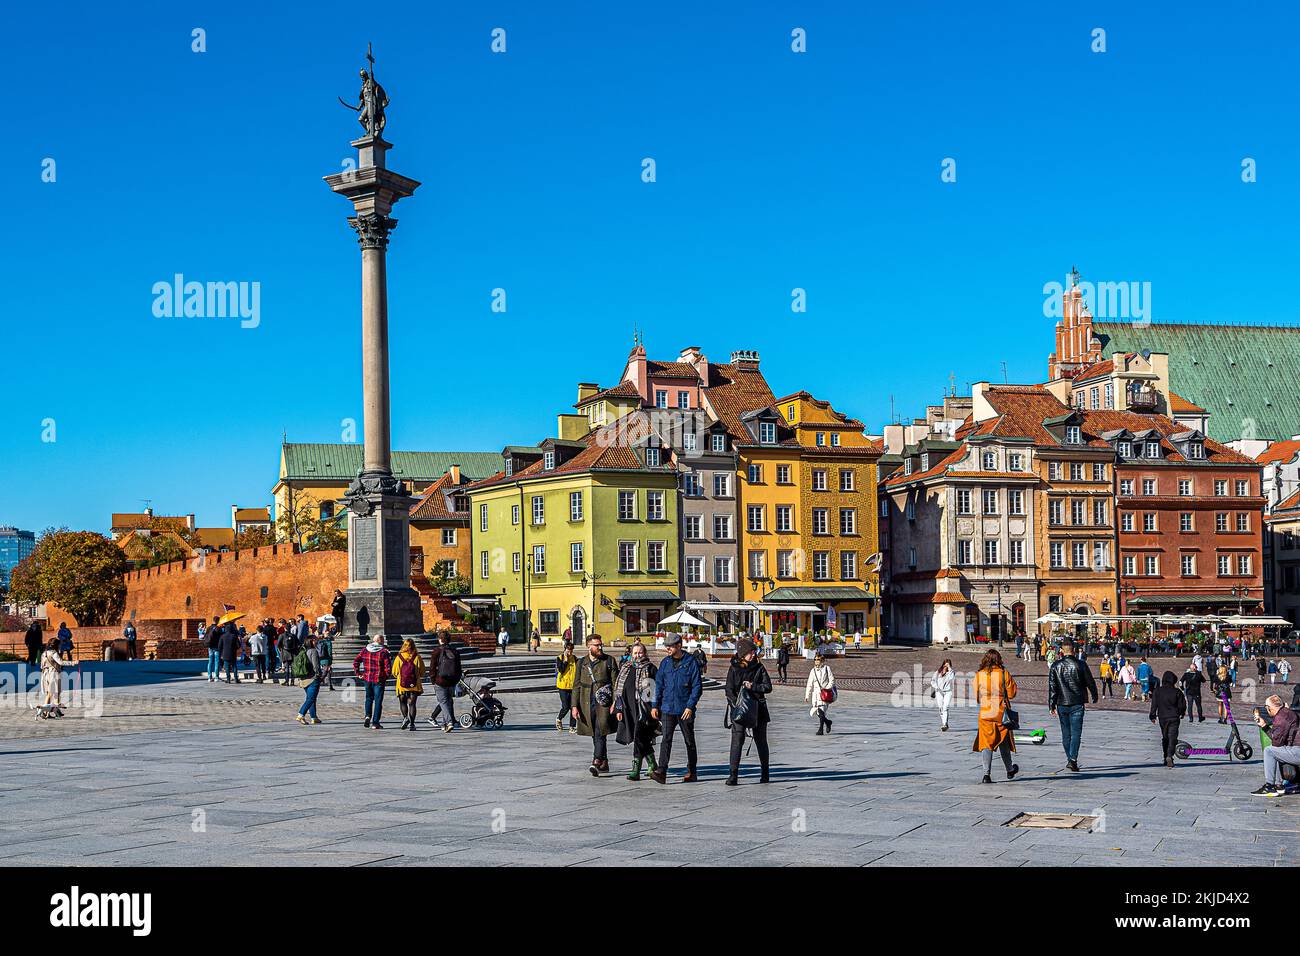 Warsaw's Old Town is the oldest part of Warsaw, the capital of Poland. Stock Photo